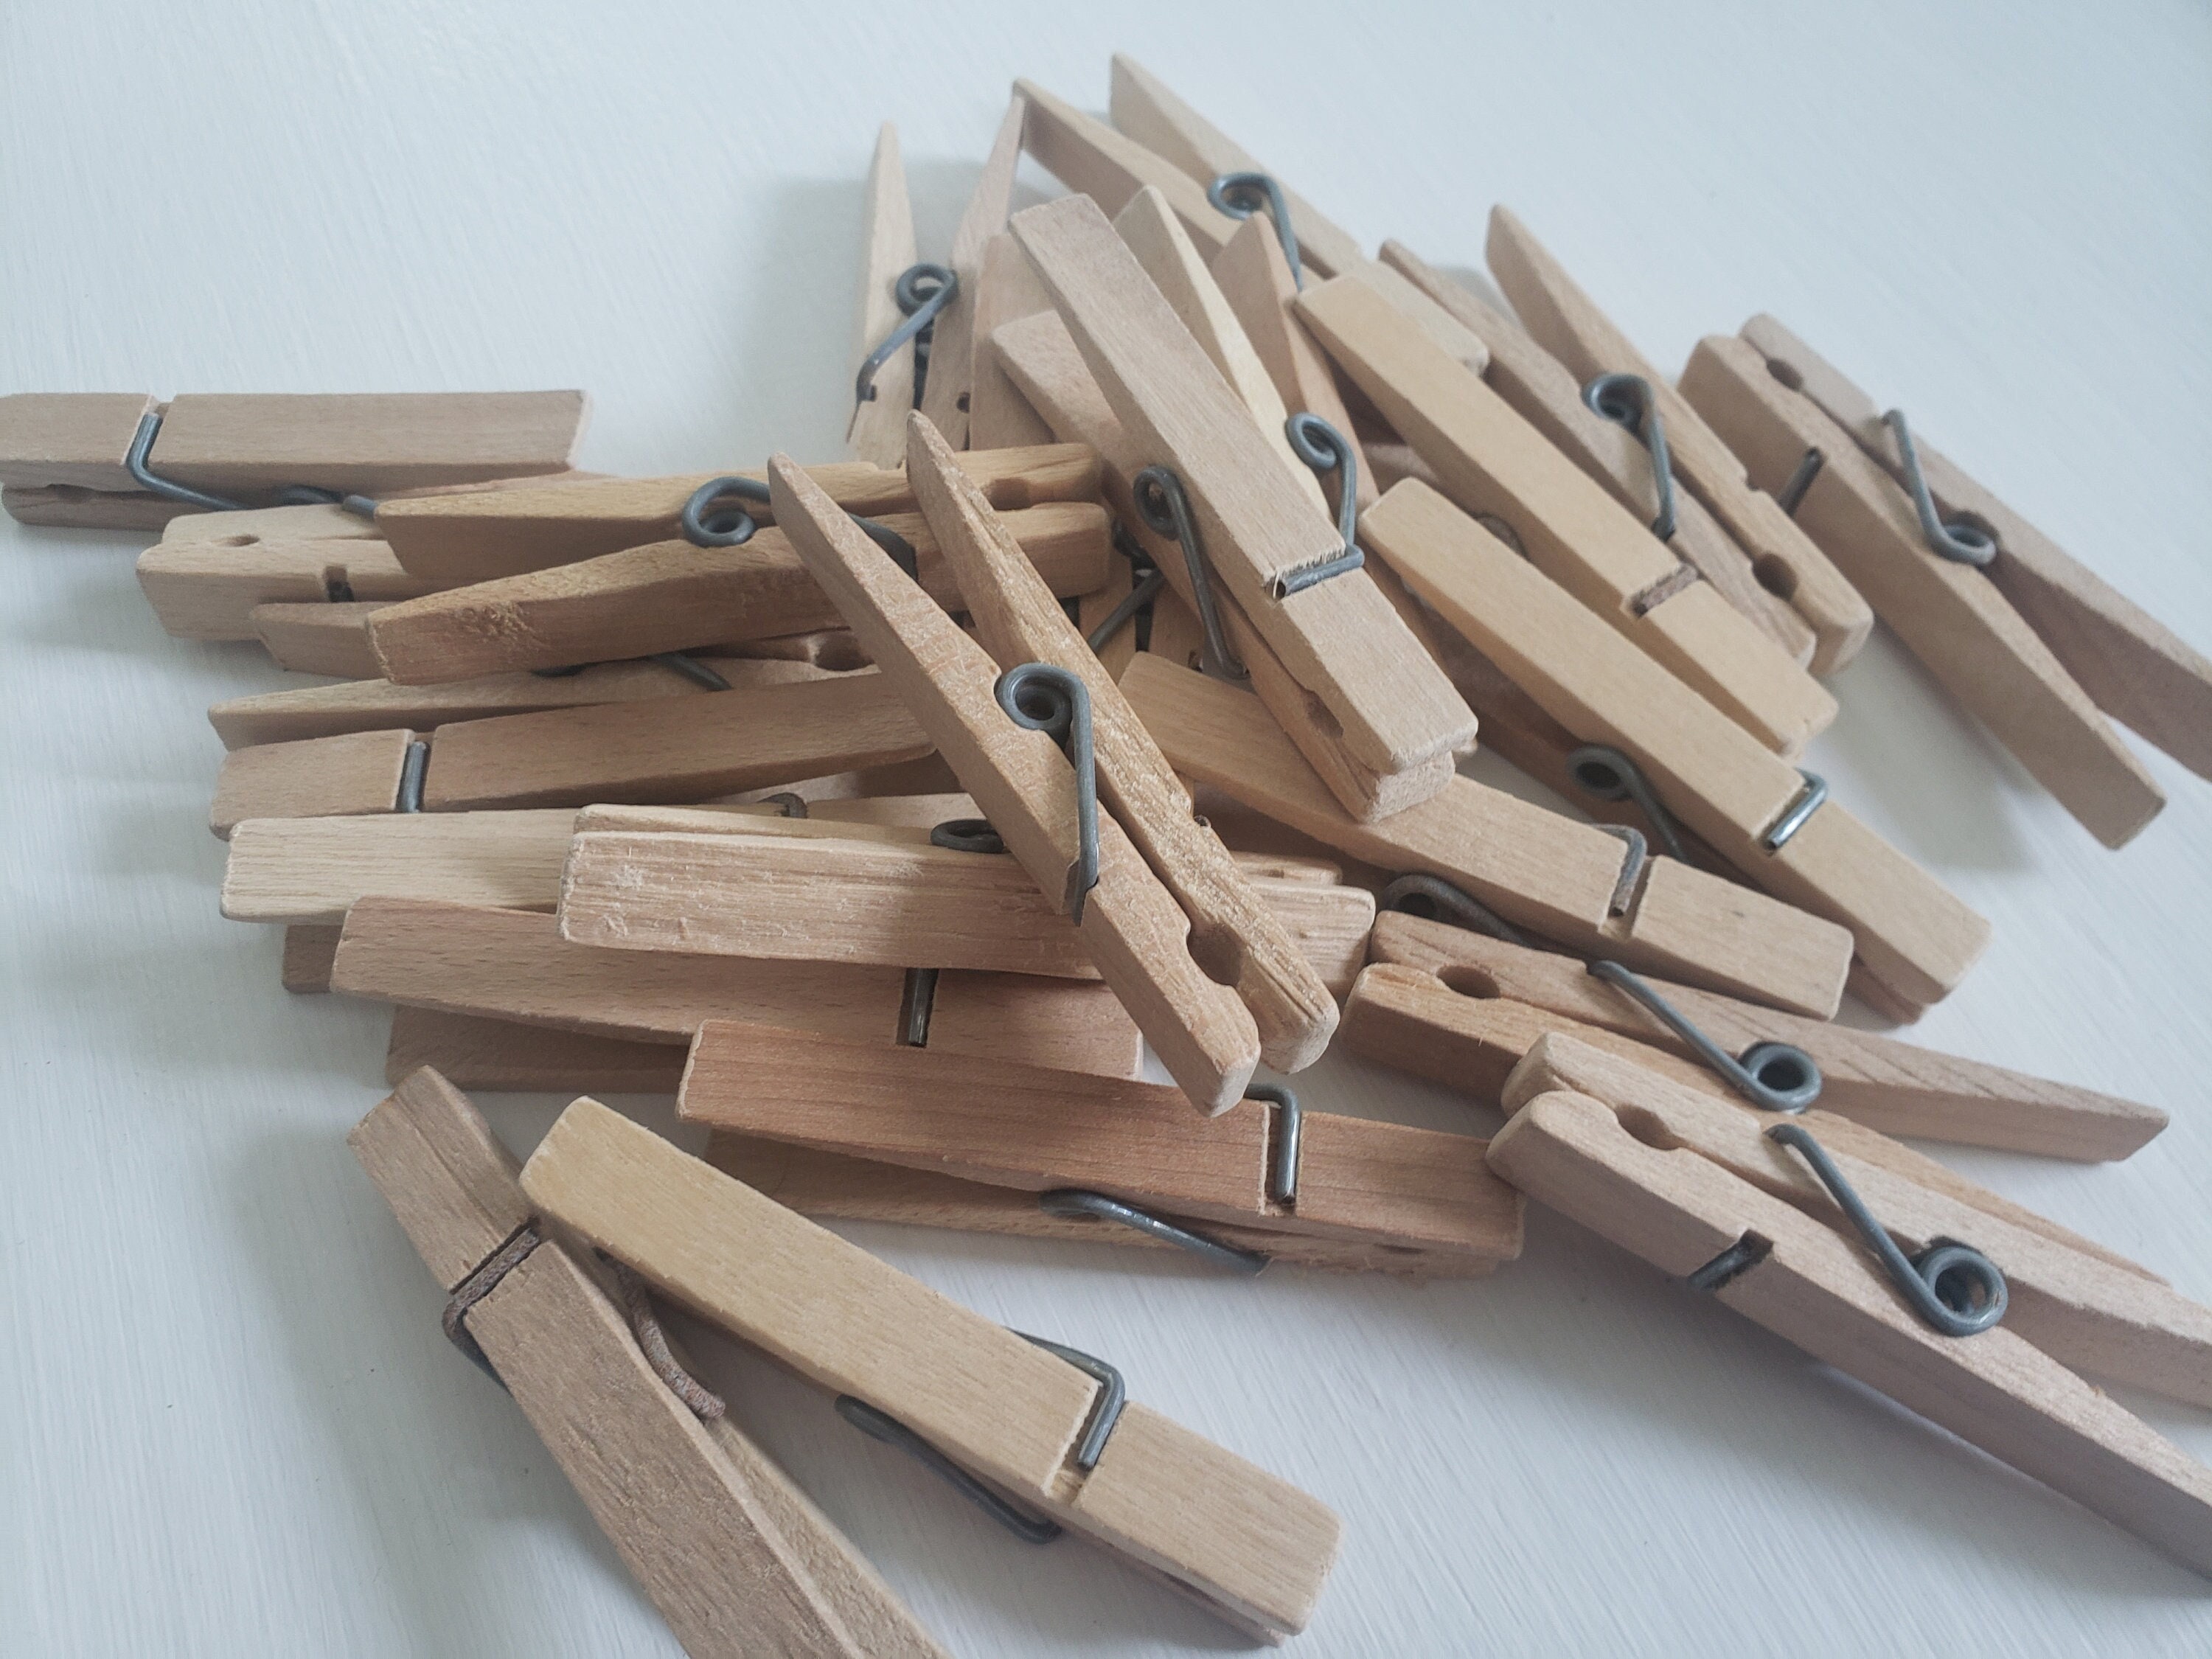 12 Clothespins Vintage Clothes Pins Wood Clothespins Craft Clothespins  Decor for Laundry Room Decor Vintage Clothespins Wood Clothes Pins 